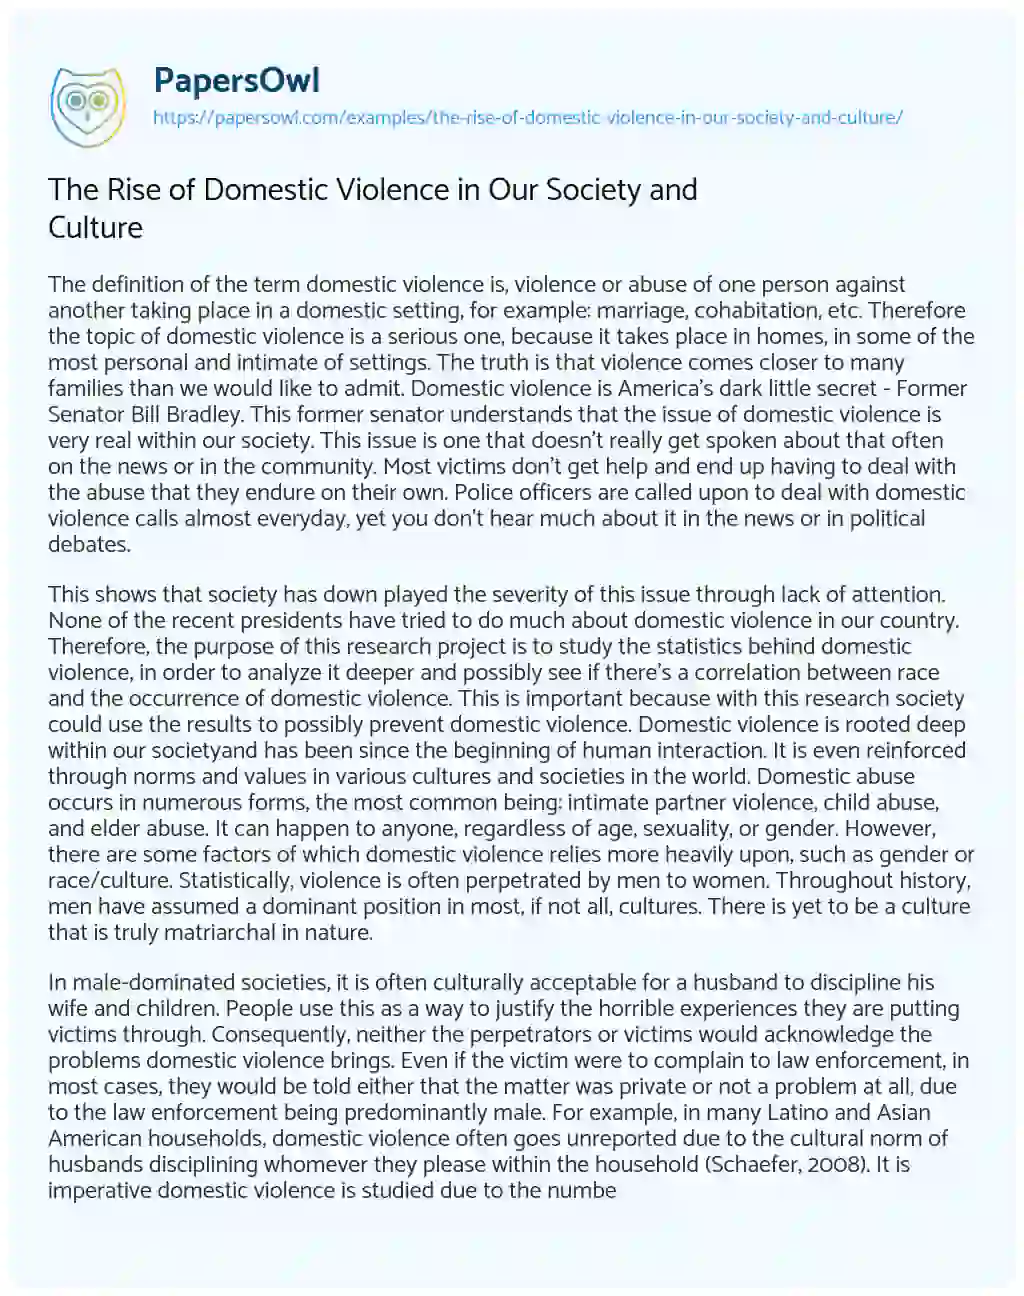 Essay on The Rise of Domestic Violence in our Society and Culture